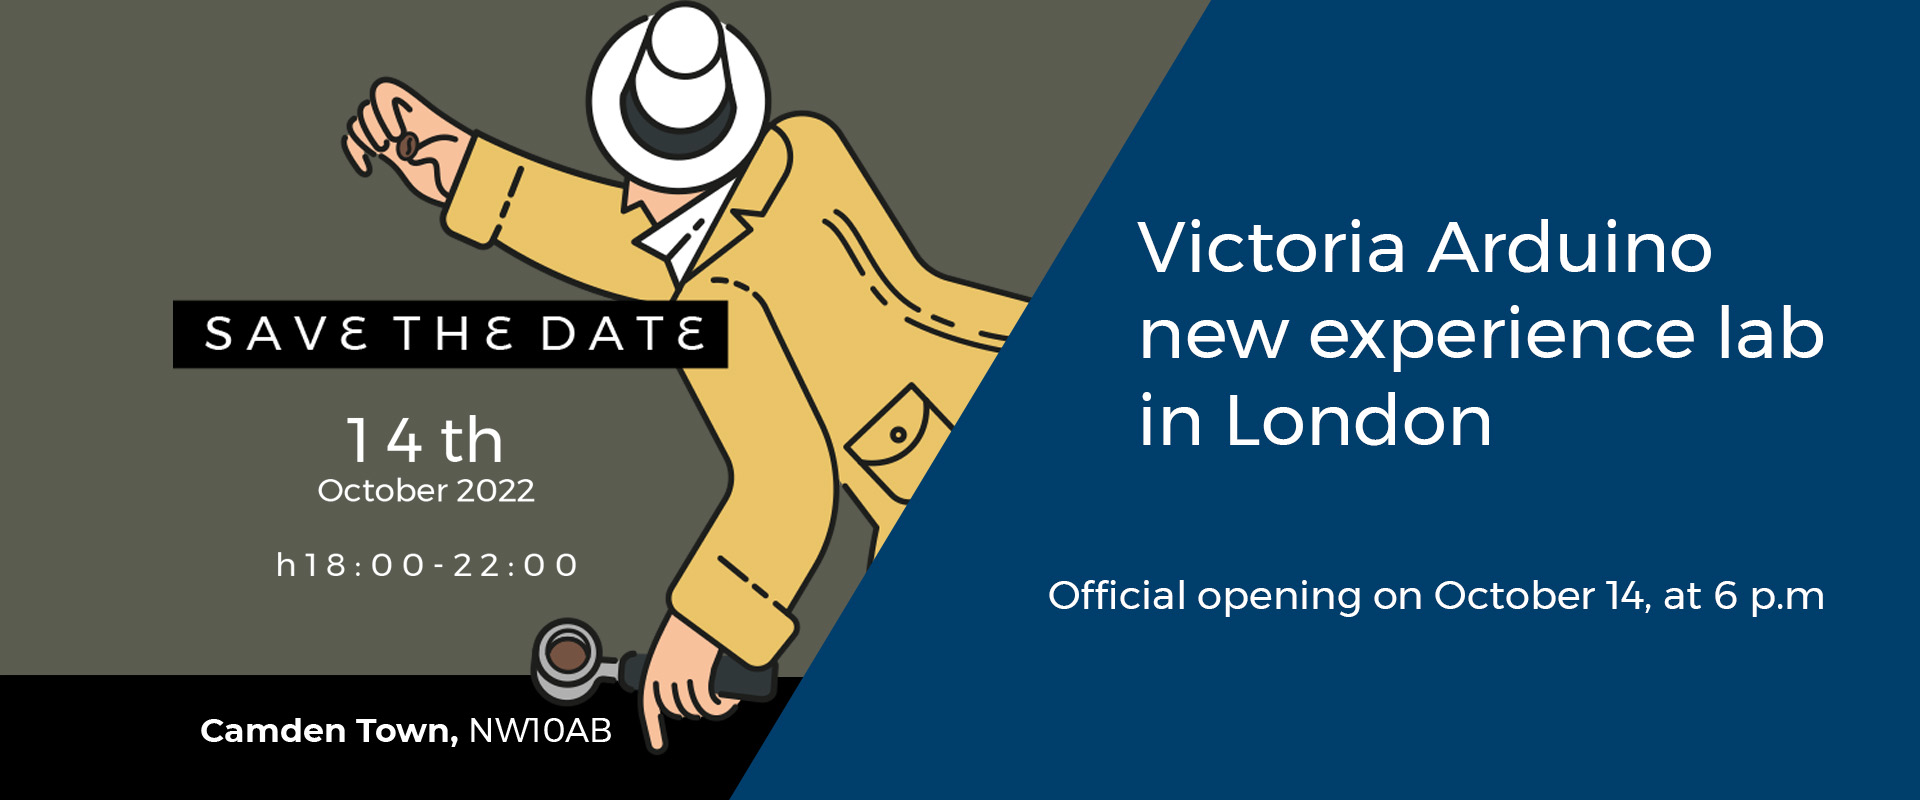 Victoria Arduino new experience lab in London